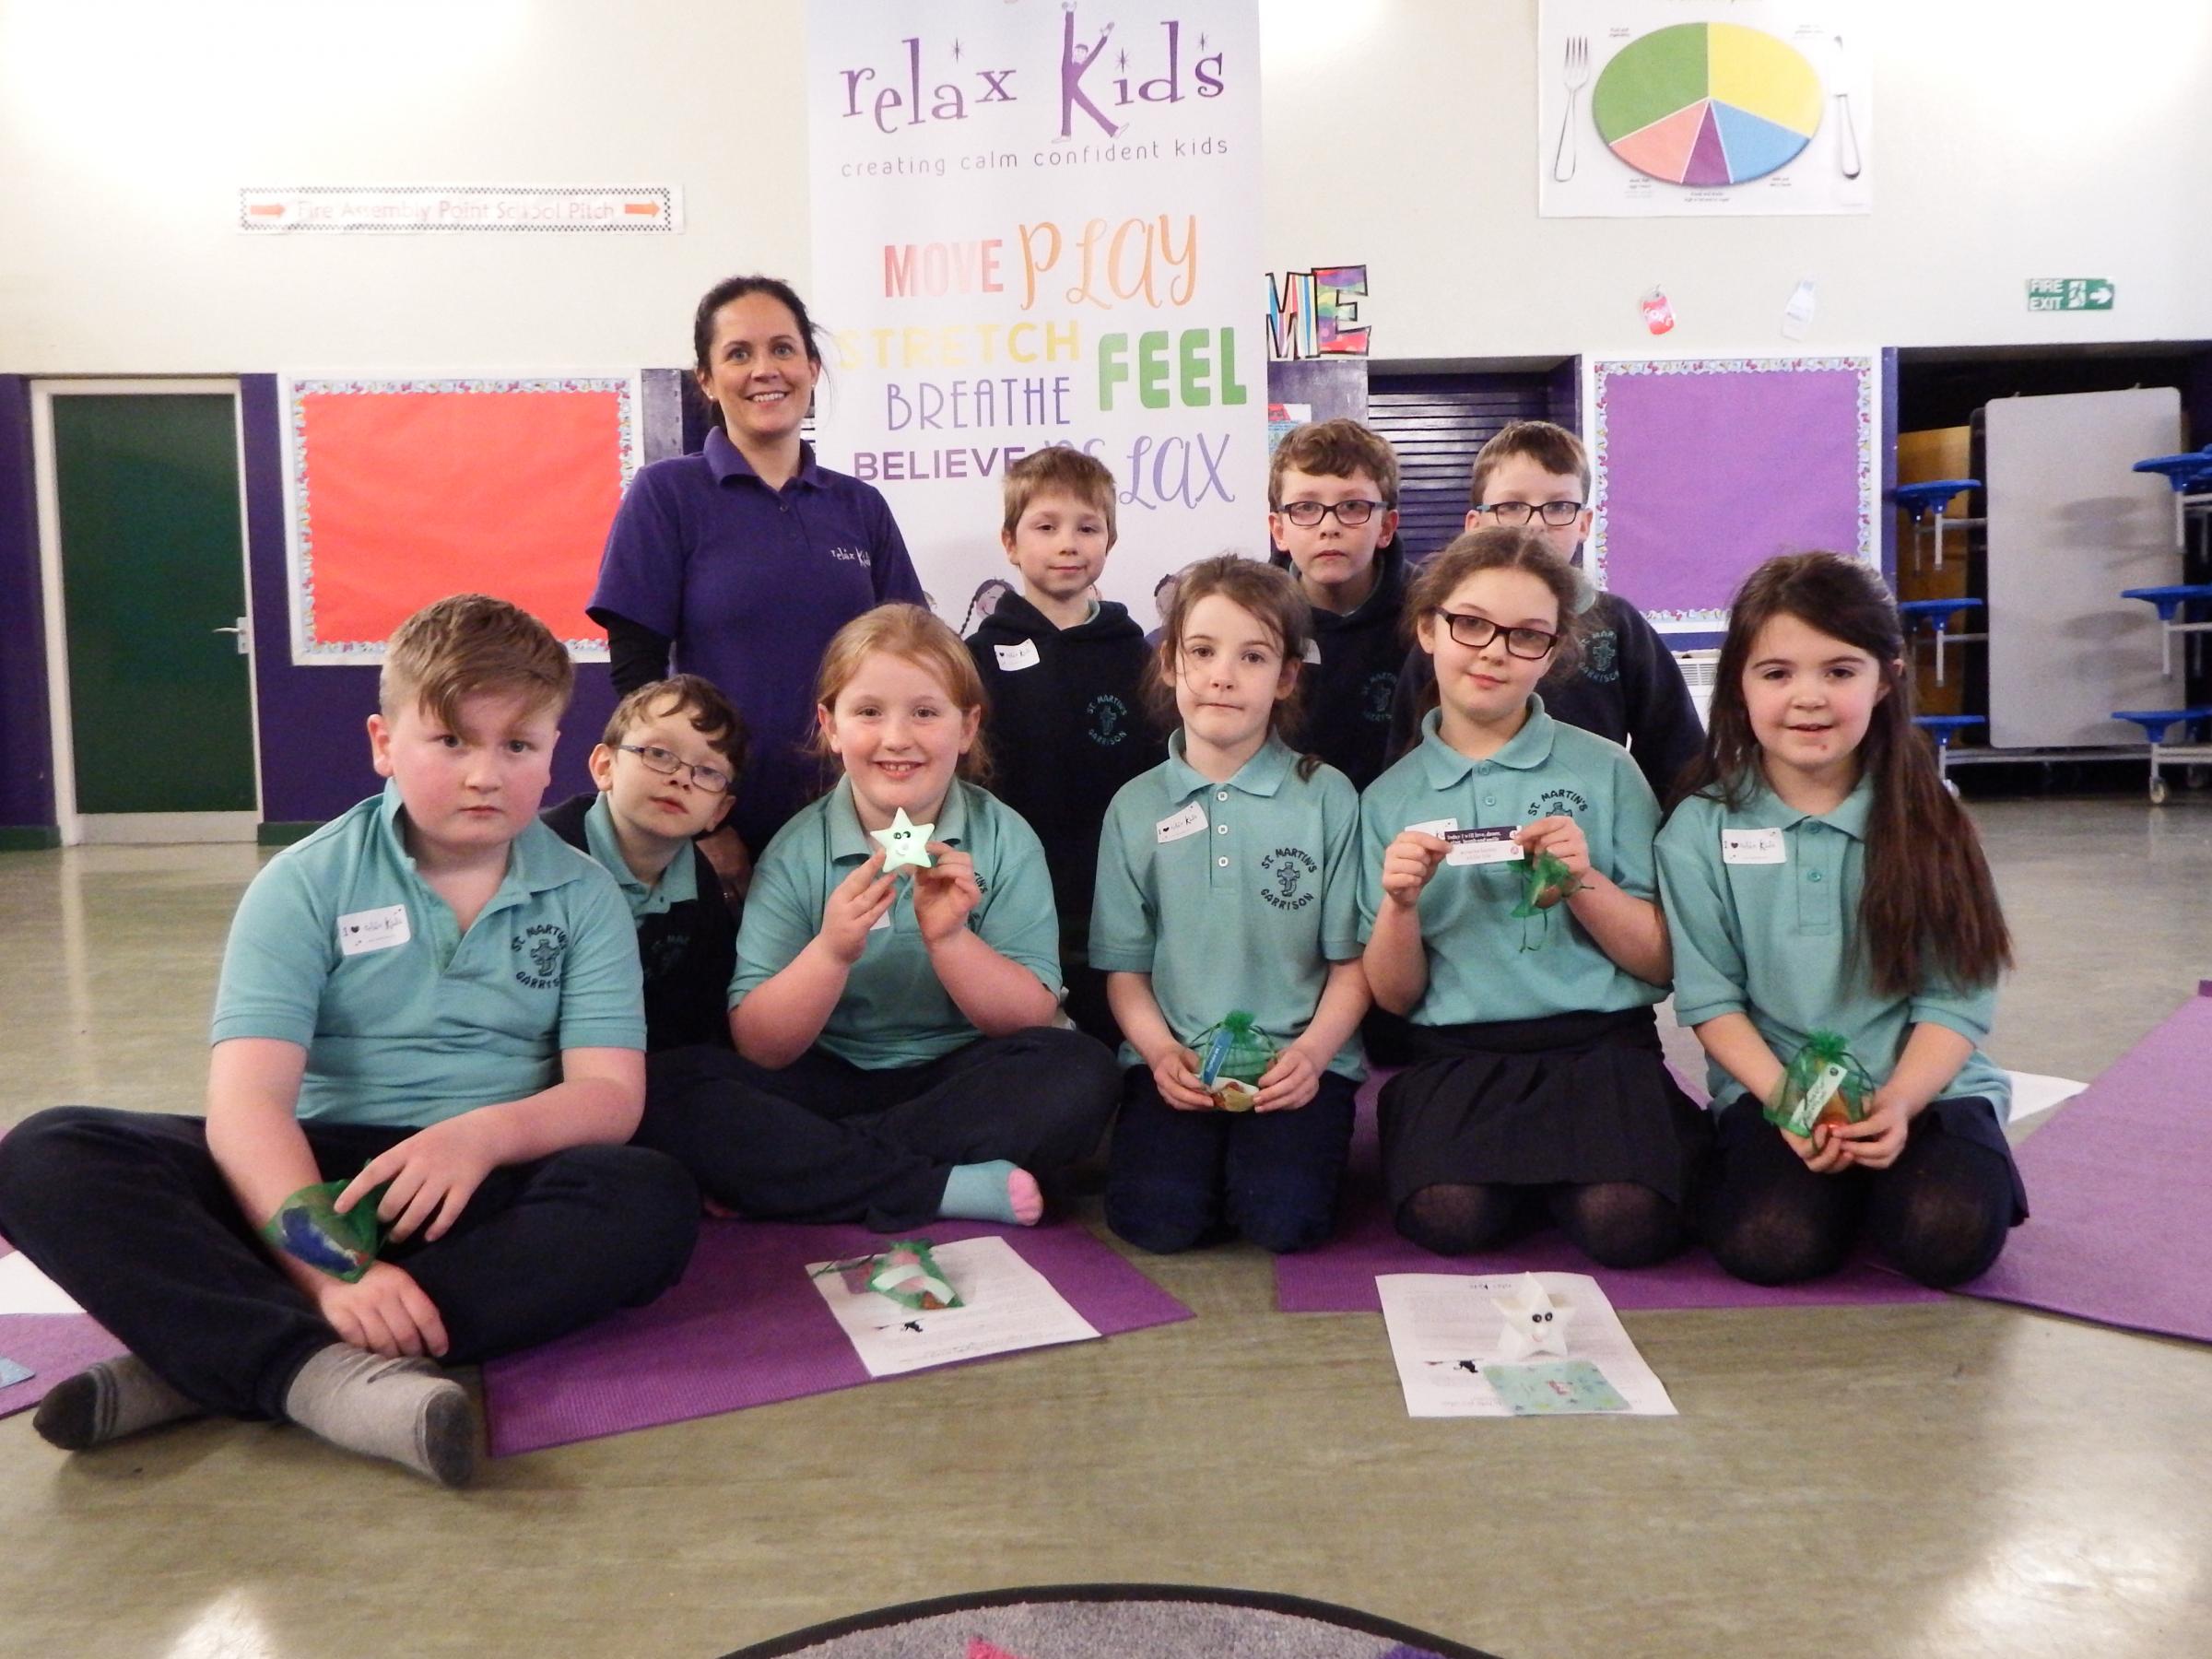 Mindfulness on the curriculum at St Martin's Primary School, Belleek - Impartial Reporter